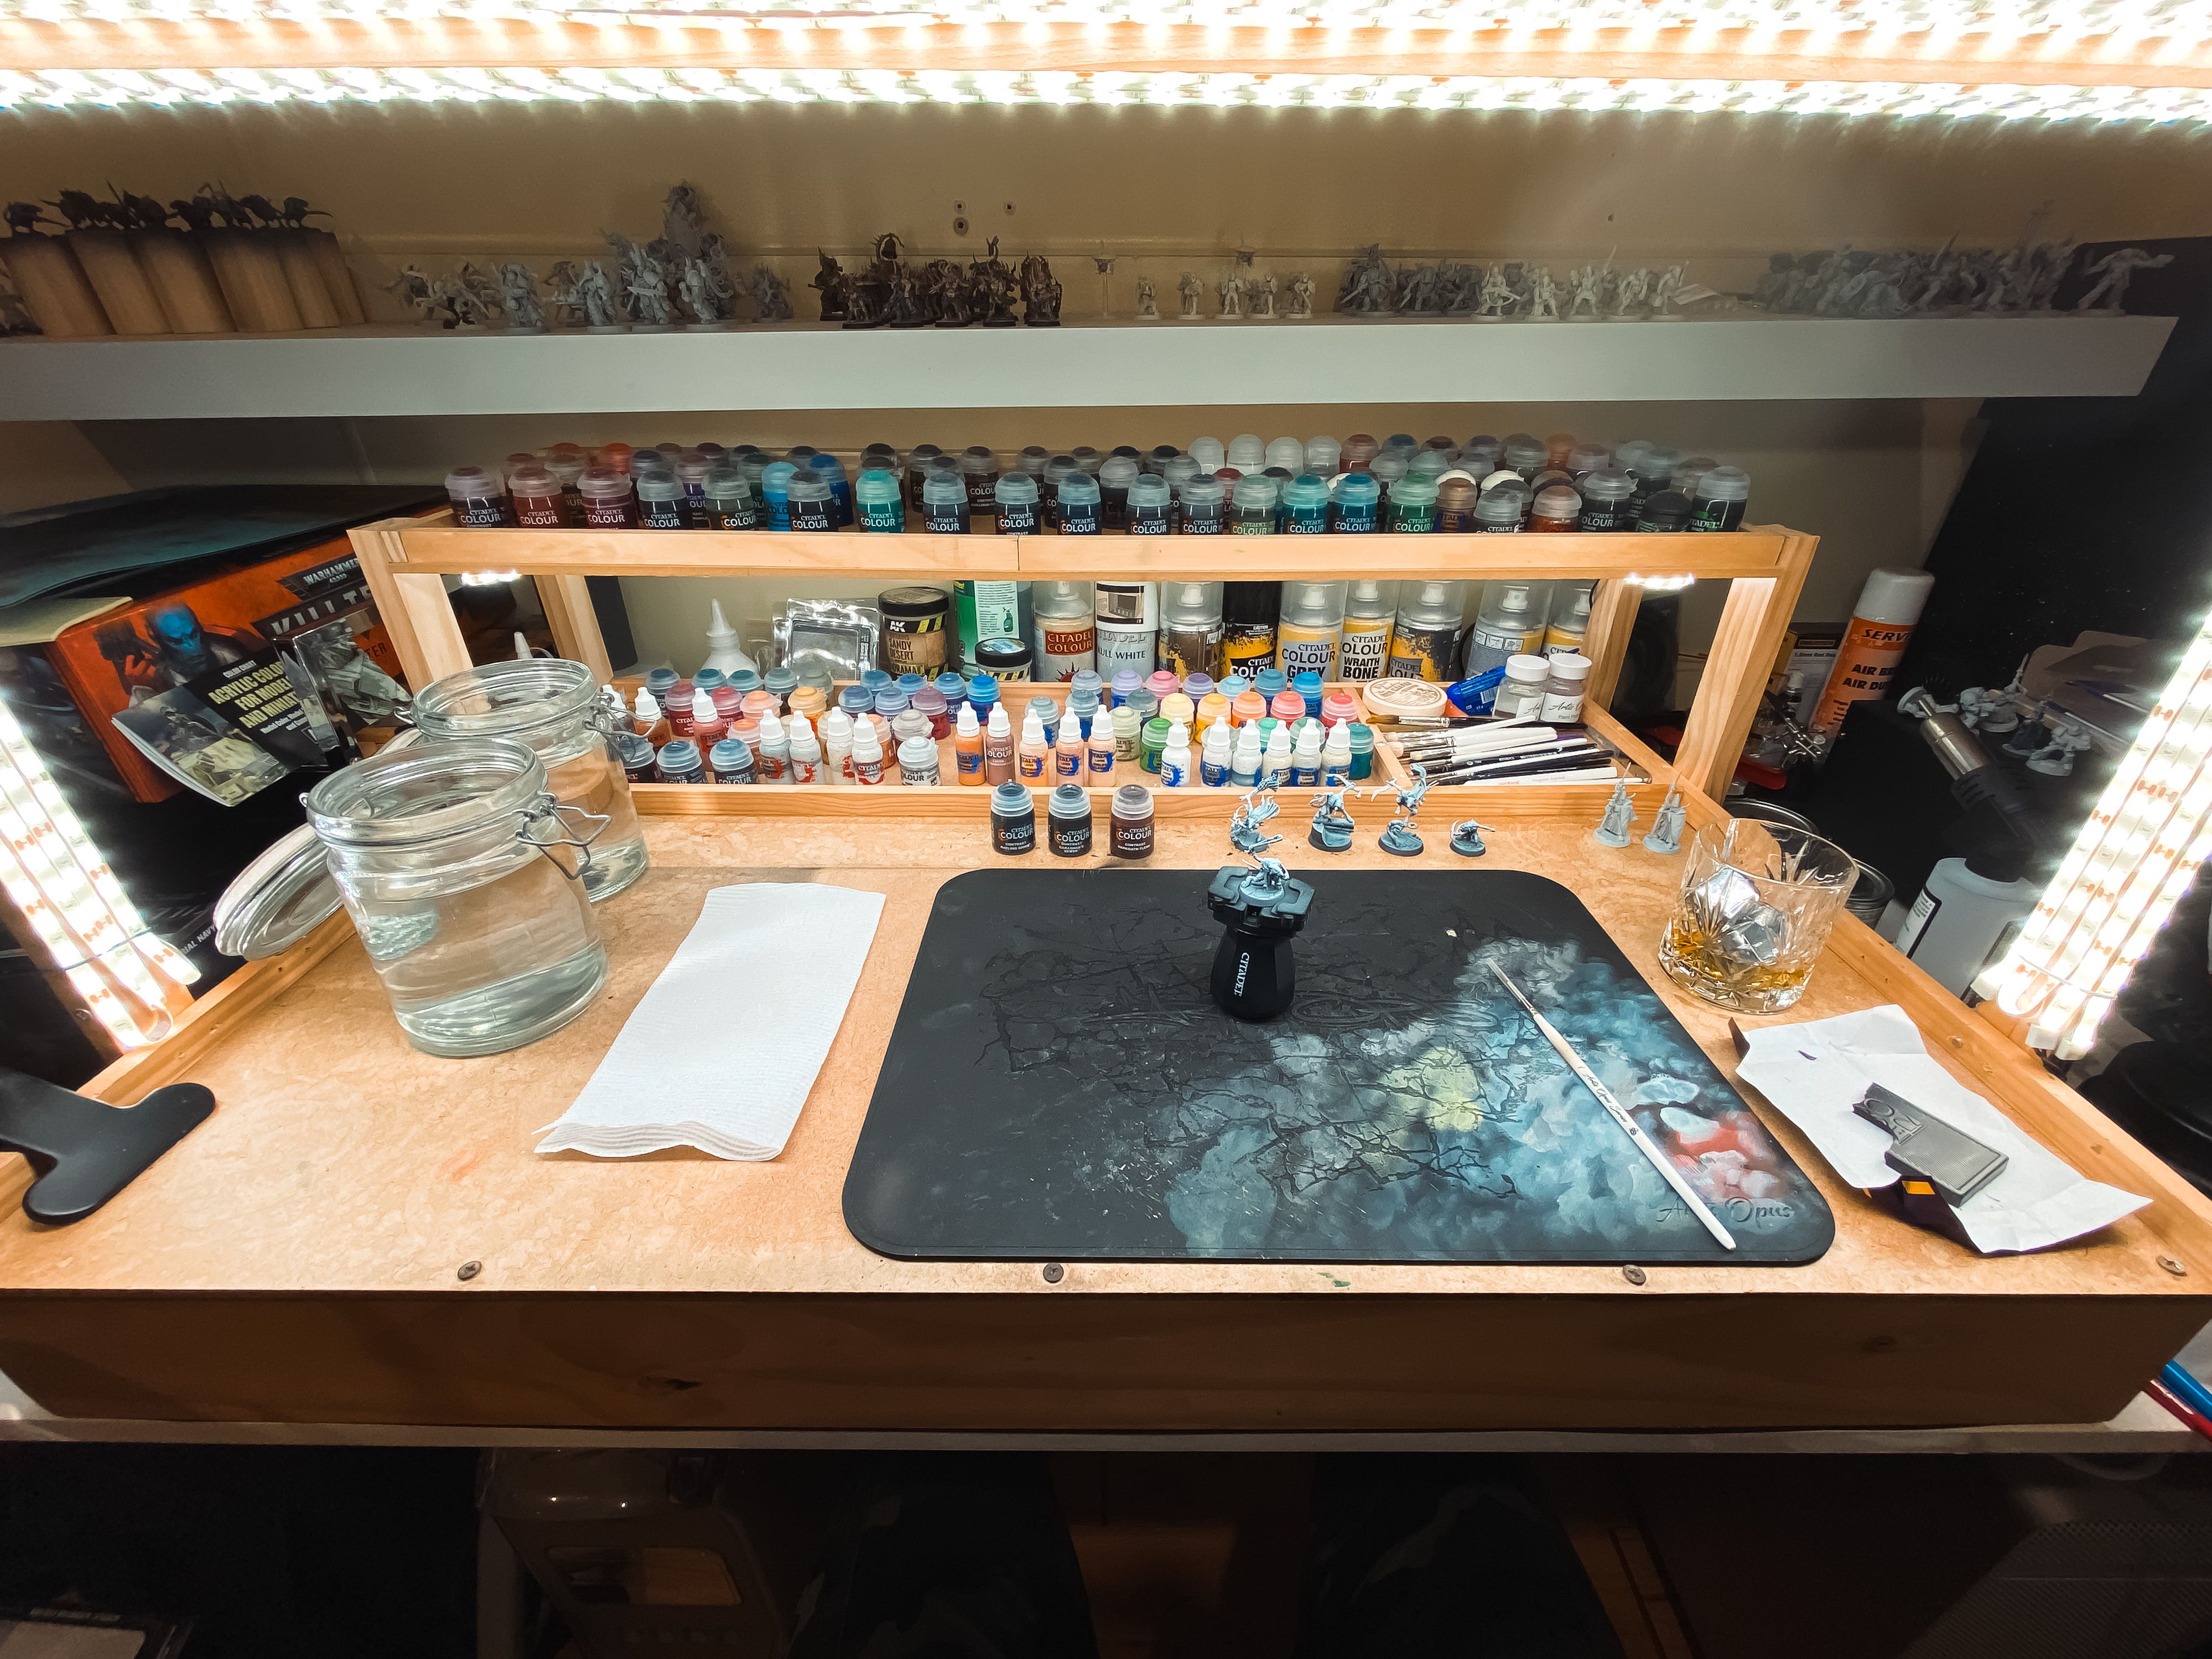 A photo of my painting desk setup, with an arch of LED strip lights illuminating the working area, five Skaven (rat-men) miniatures ready to be painted, and a bunch of little pots of paint spread over two shelves.